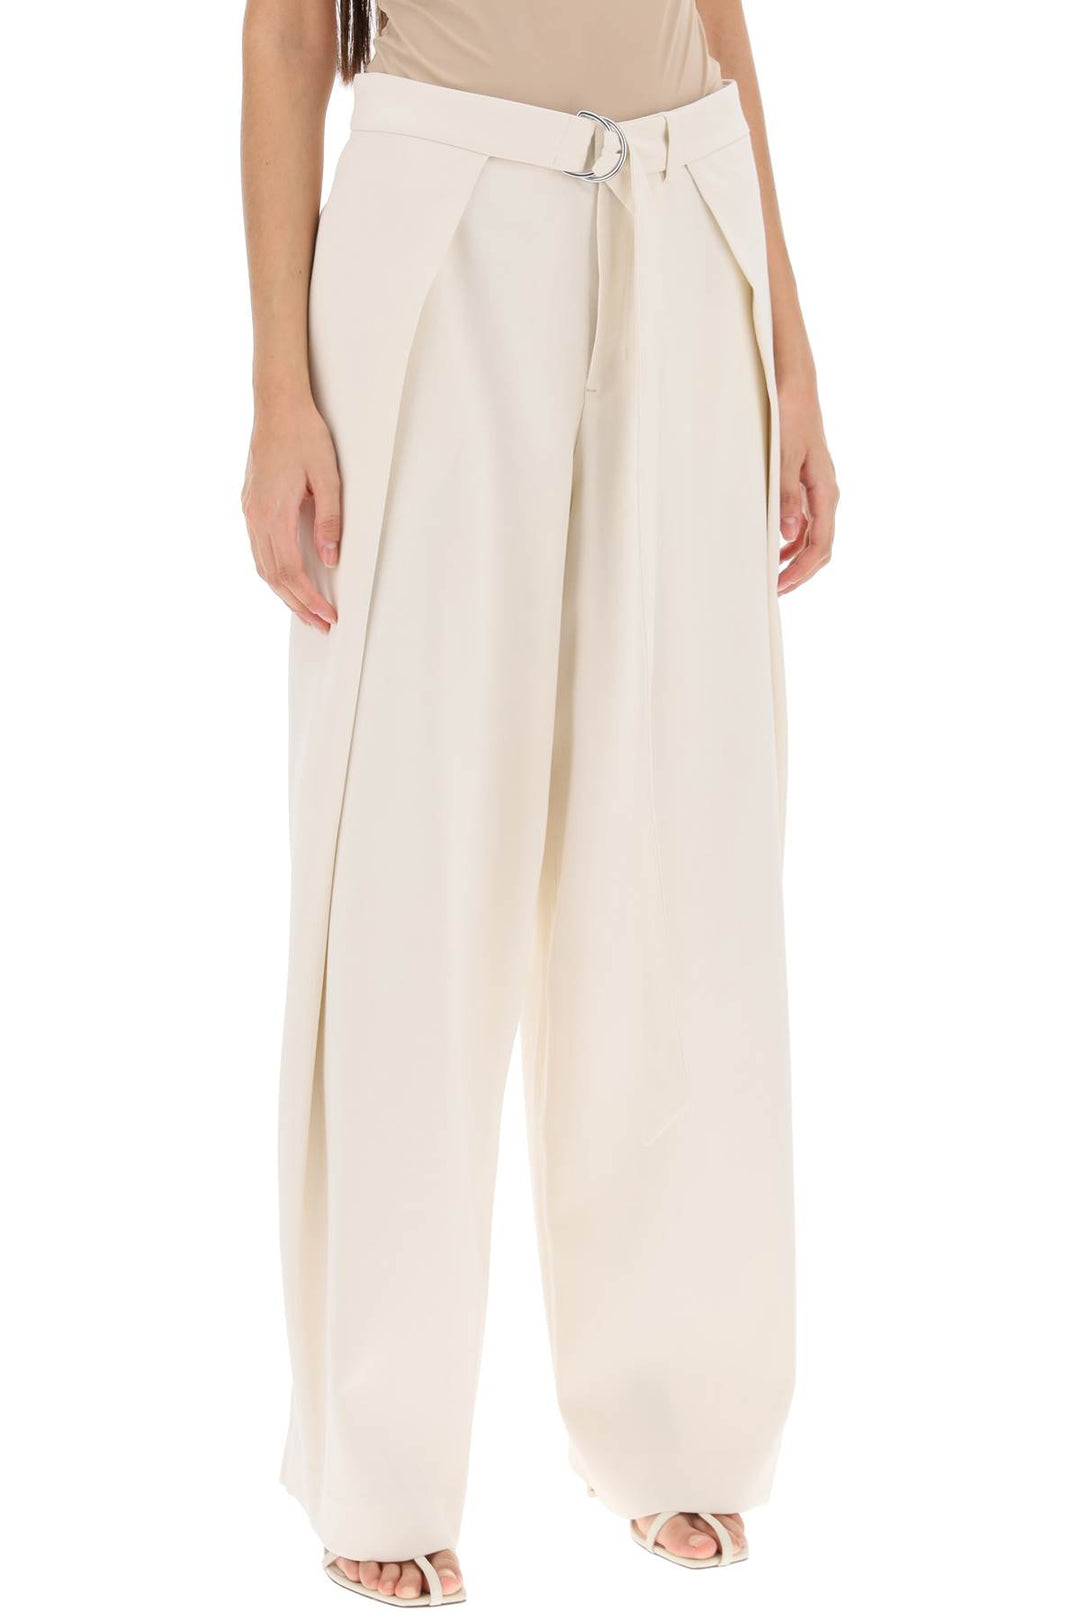 Ami Alexandre Matiussi Wide Fit Pants With Floating Panels   Bianco